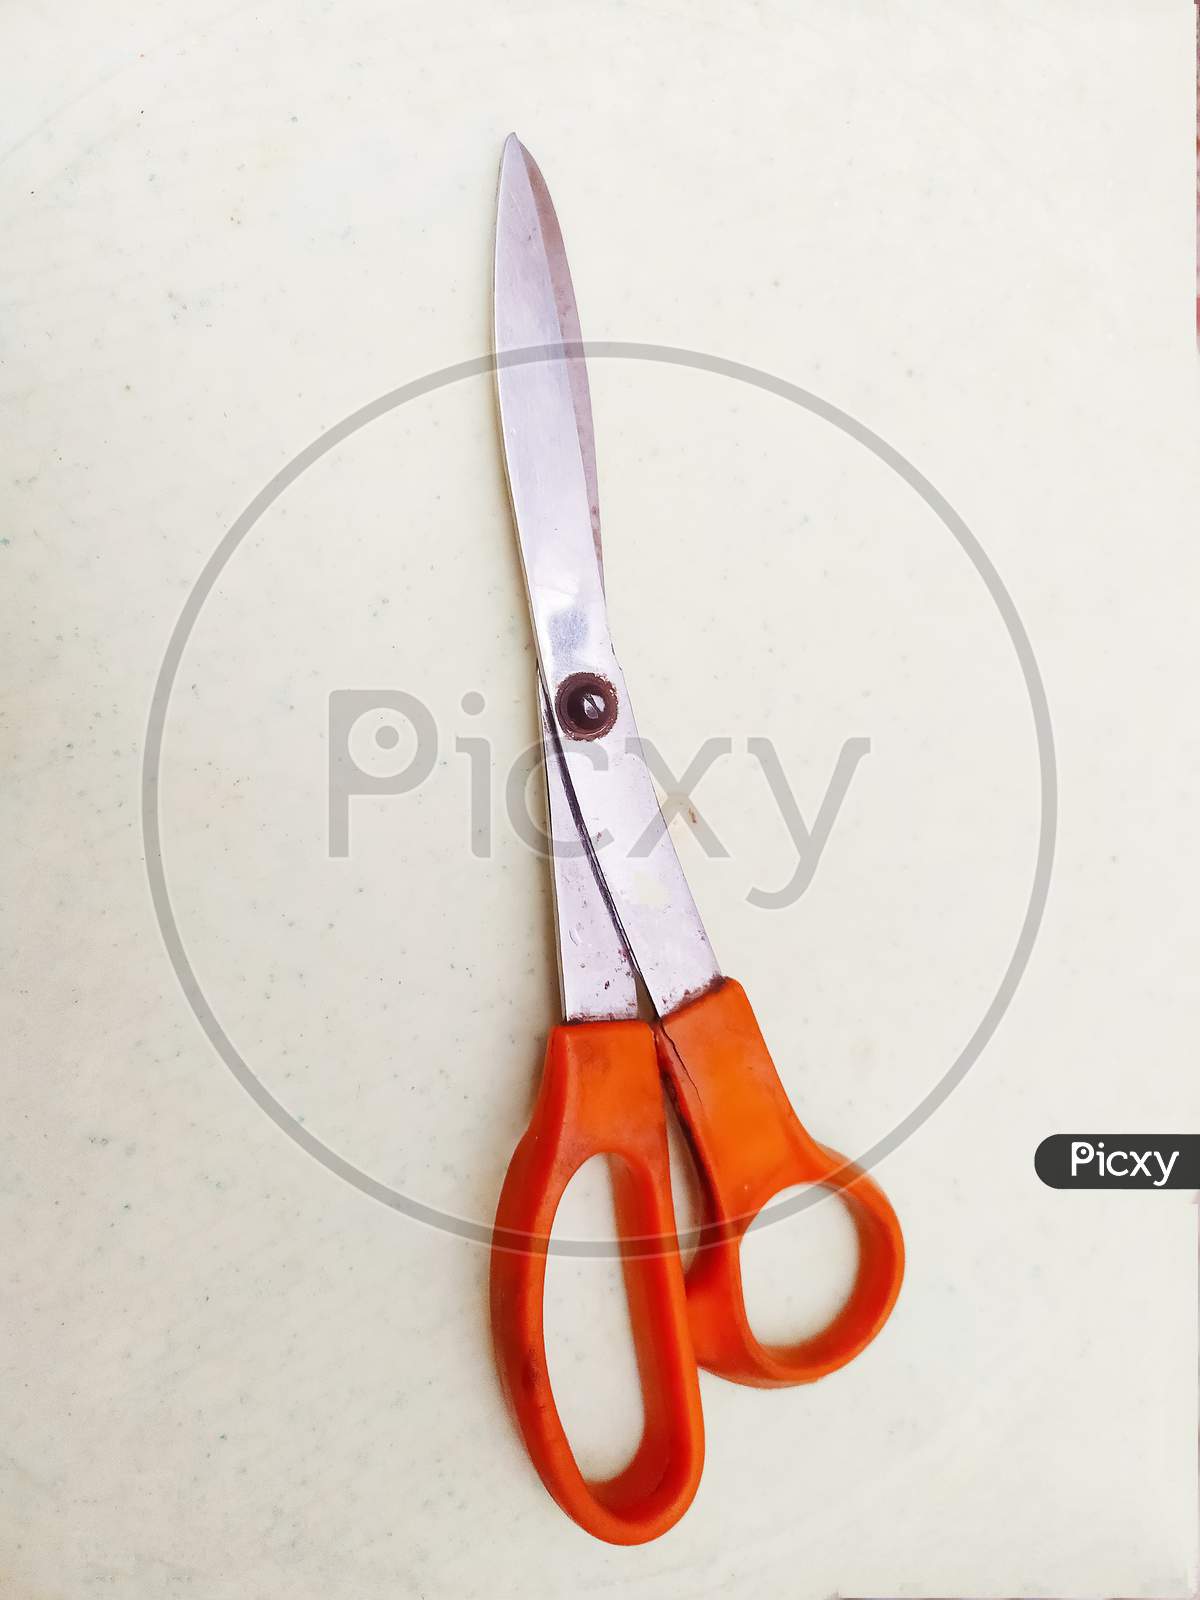 Topview of orange scissor isolated on white surface, the scissors use for tailoring uses